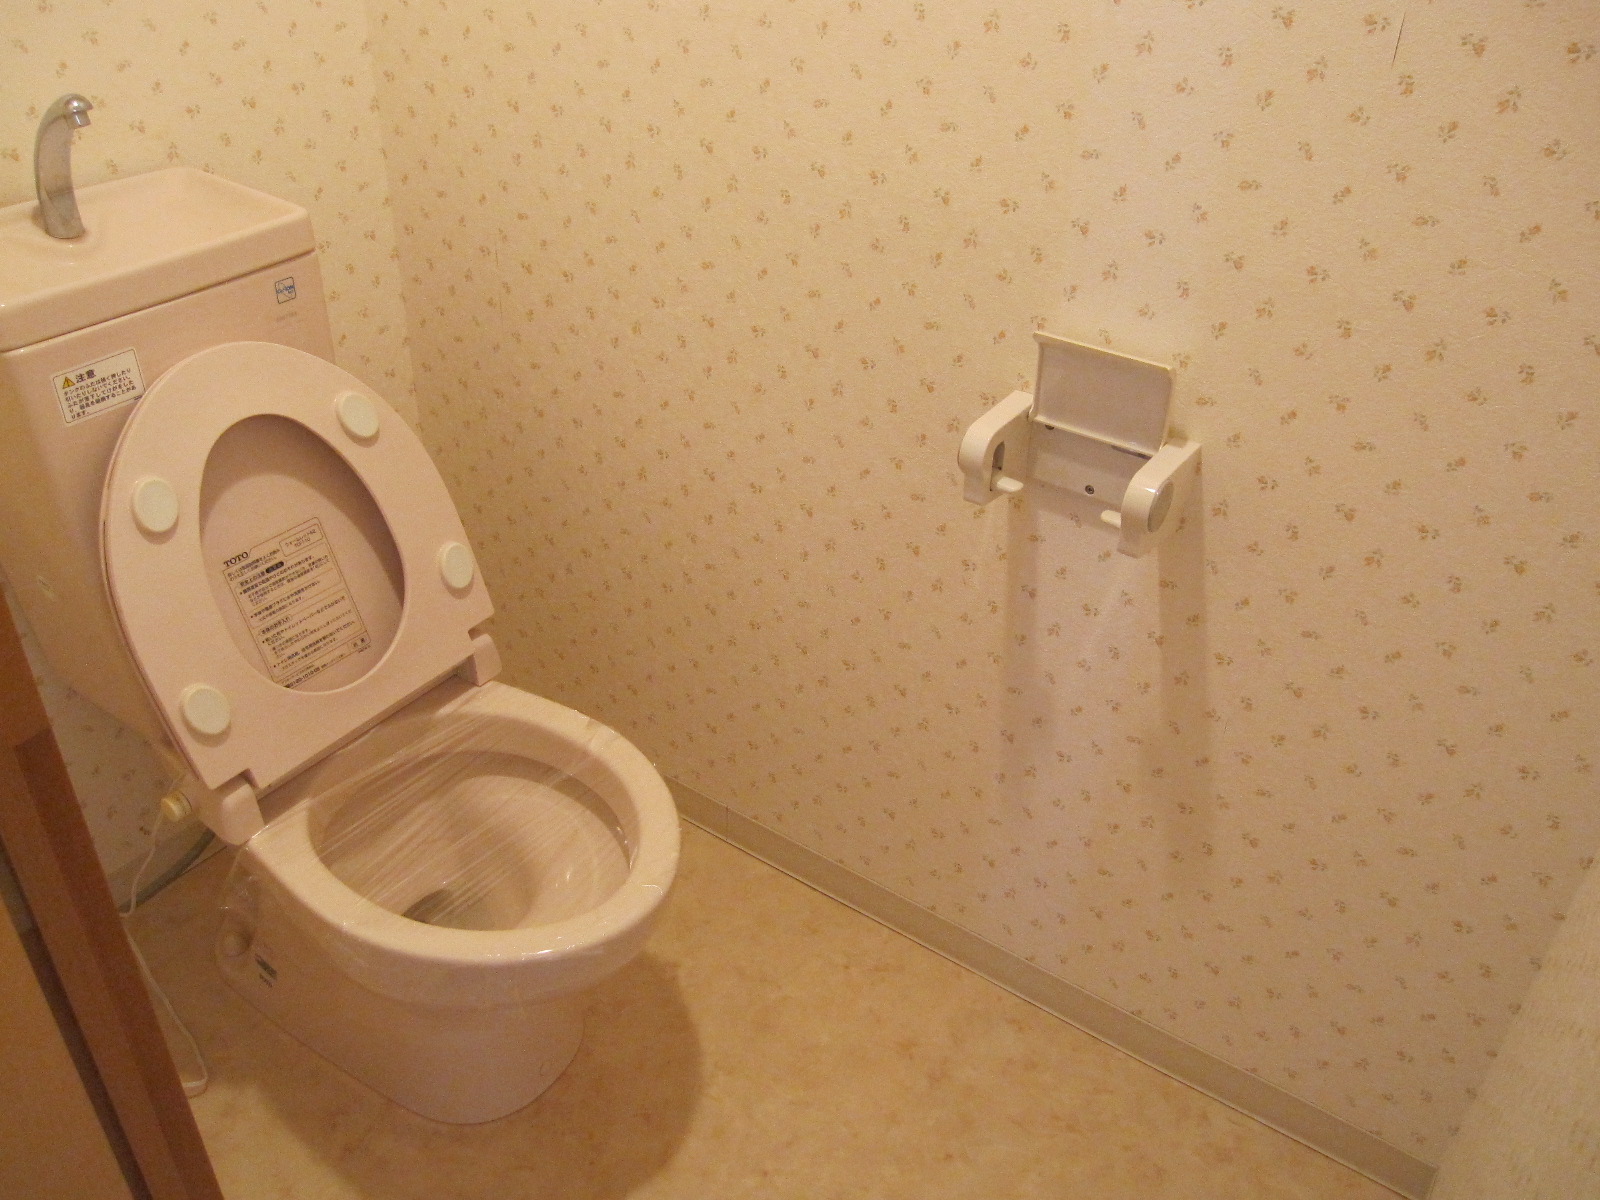 Toilet. It comes with a heating toilet seat